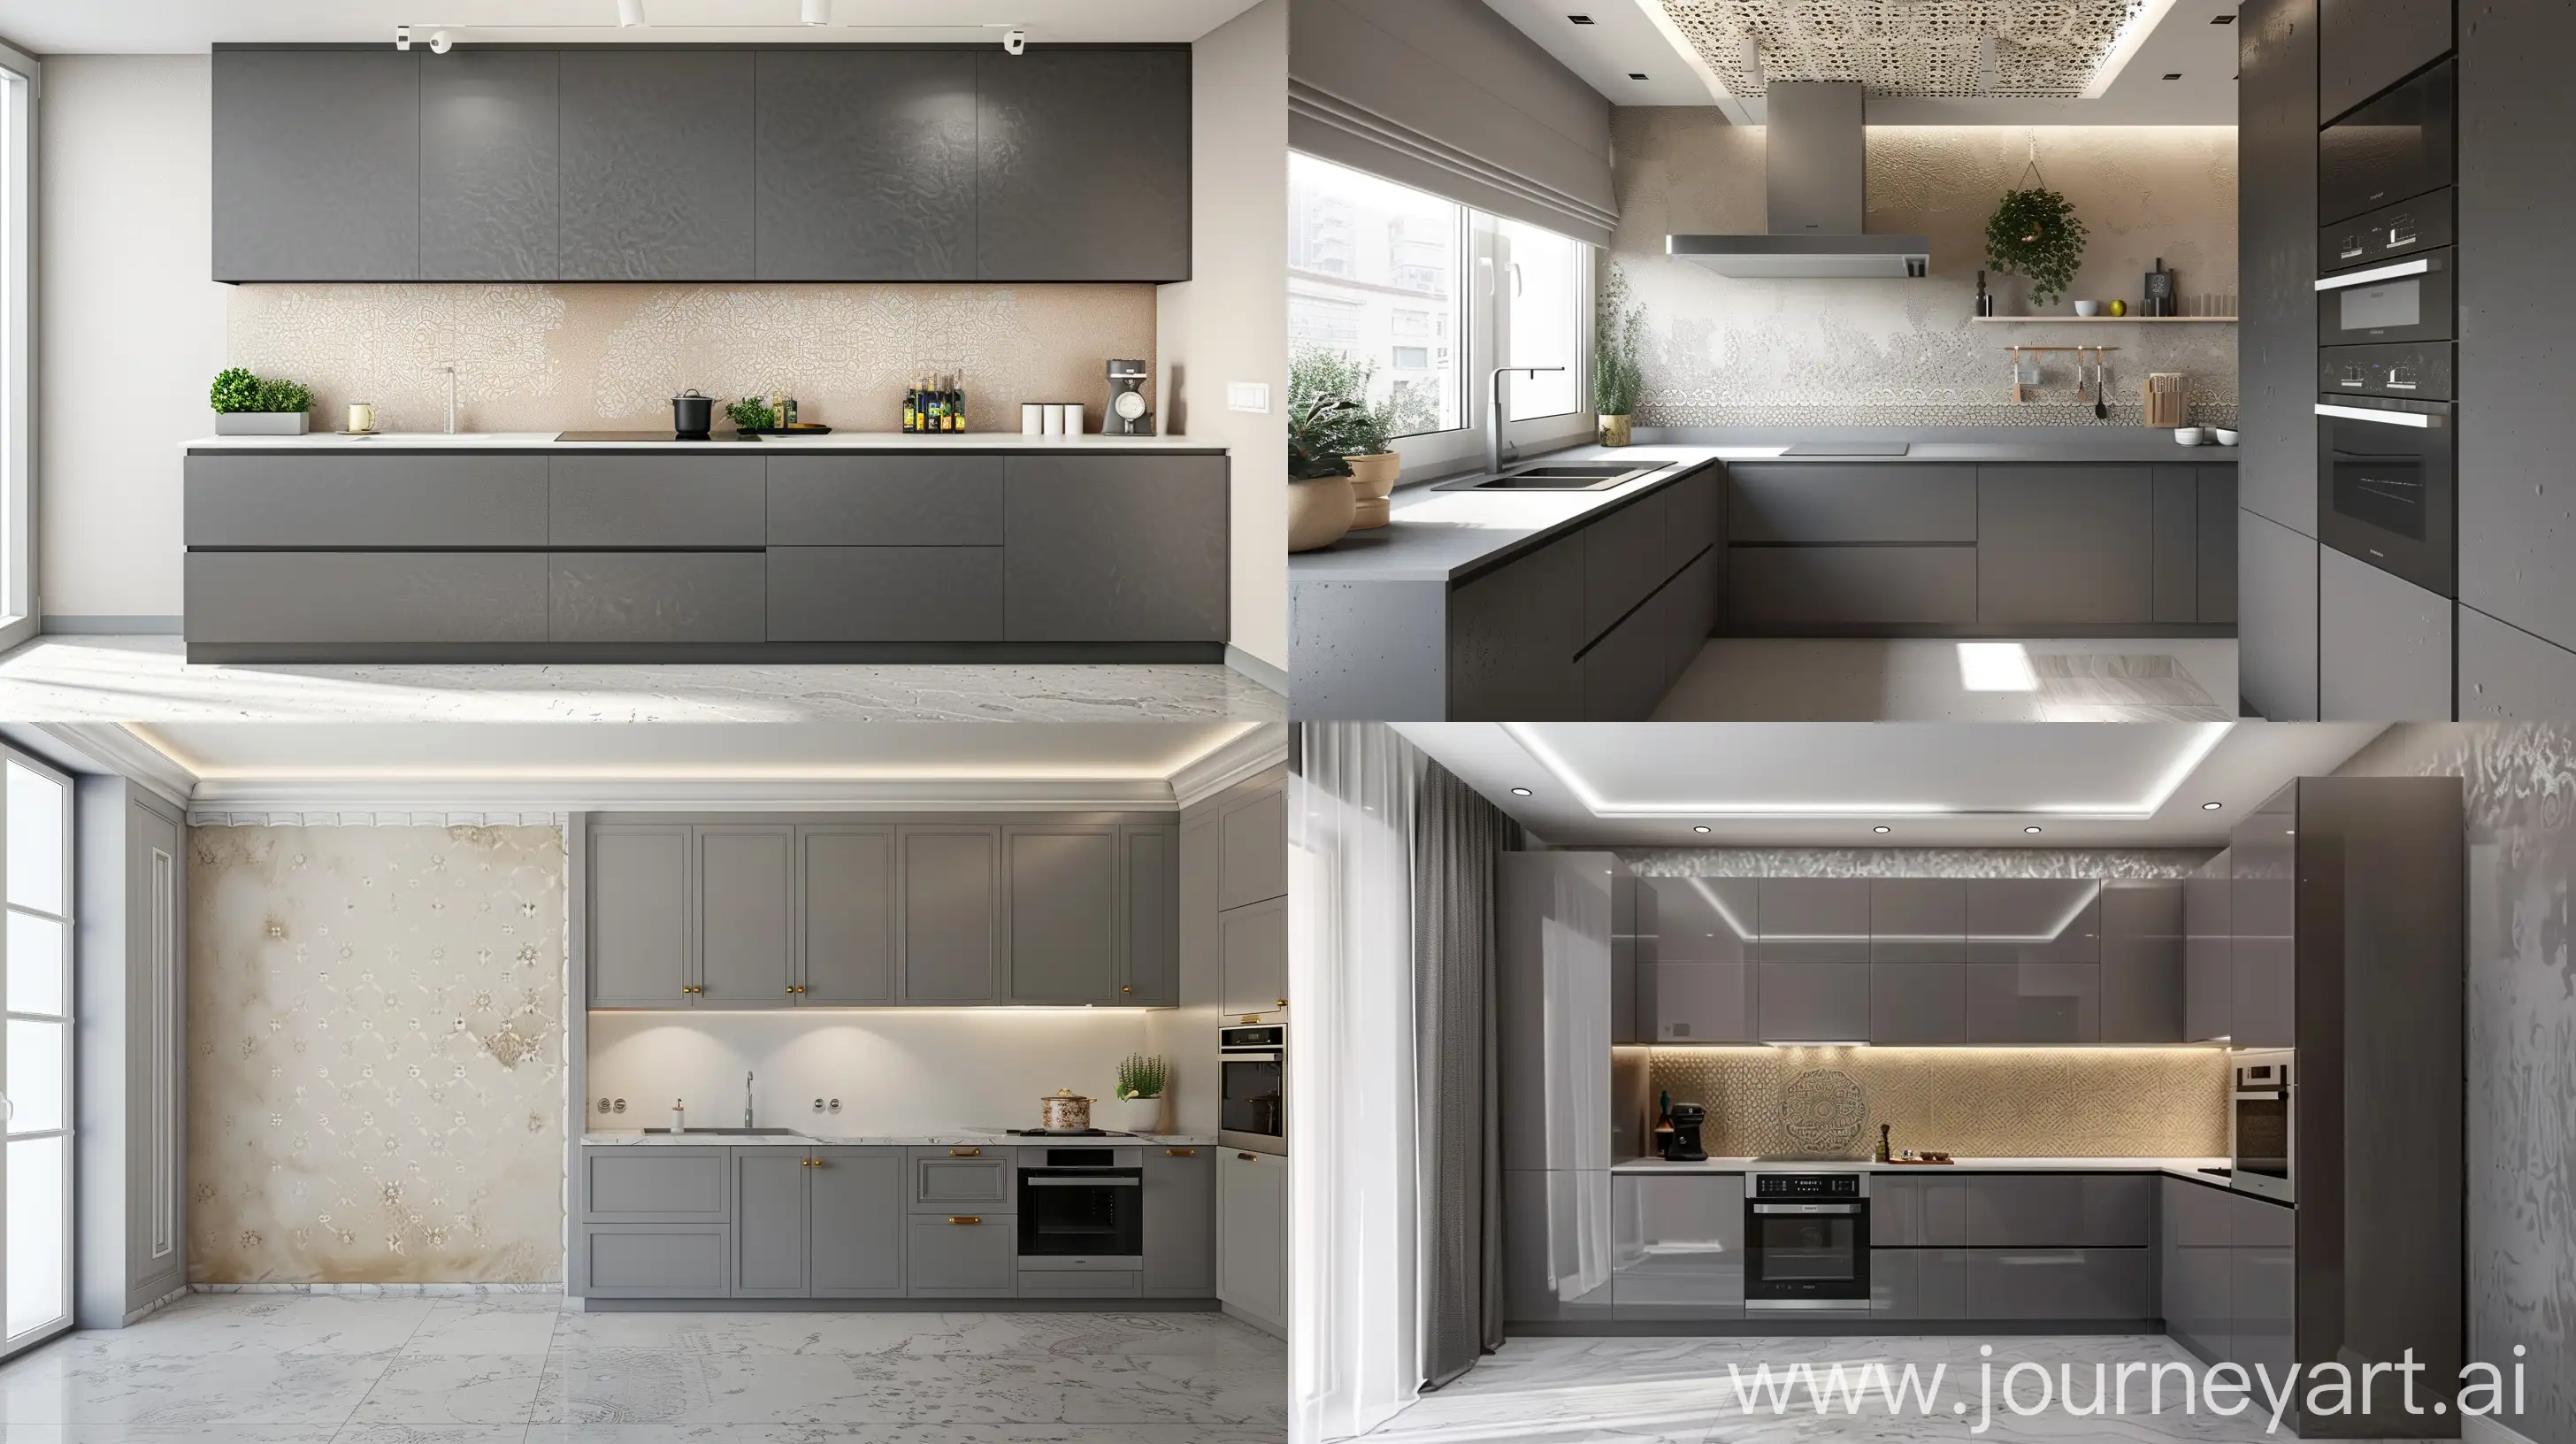 maximally realistic kitchen design in grey colours, next to the wall with decorative plaster in beige tones with small mandala patterns, white stretch ceiling --ar 16:9 --v 6.0